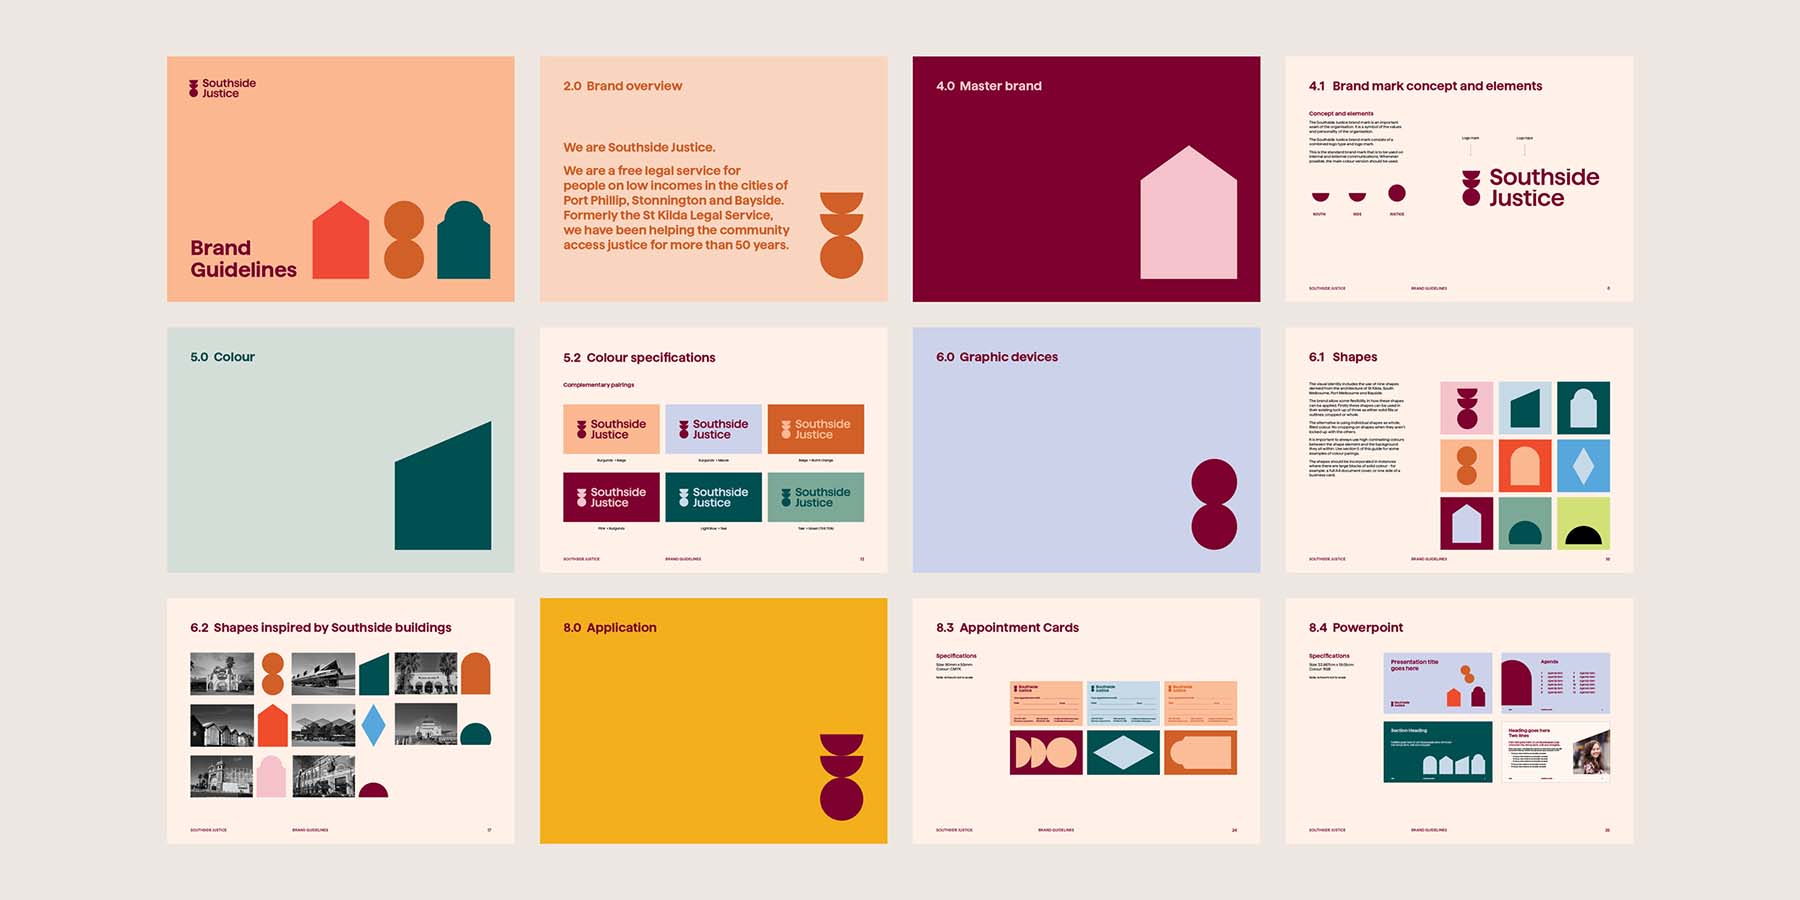 Southside Justice brand guidelines sample pages outlining the logo, brand colours, fonts and graphic systems.